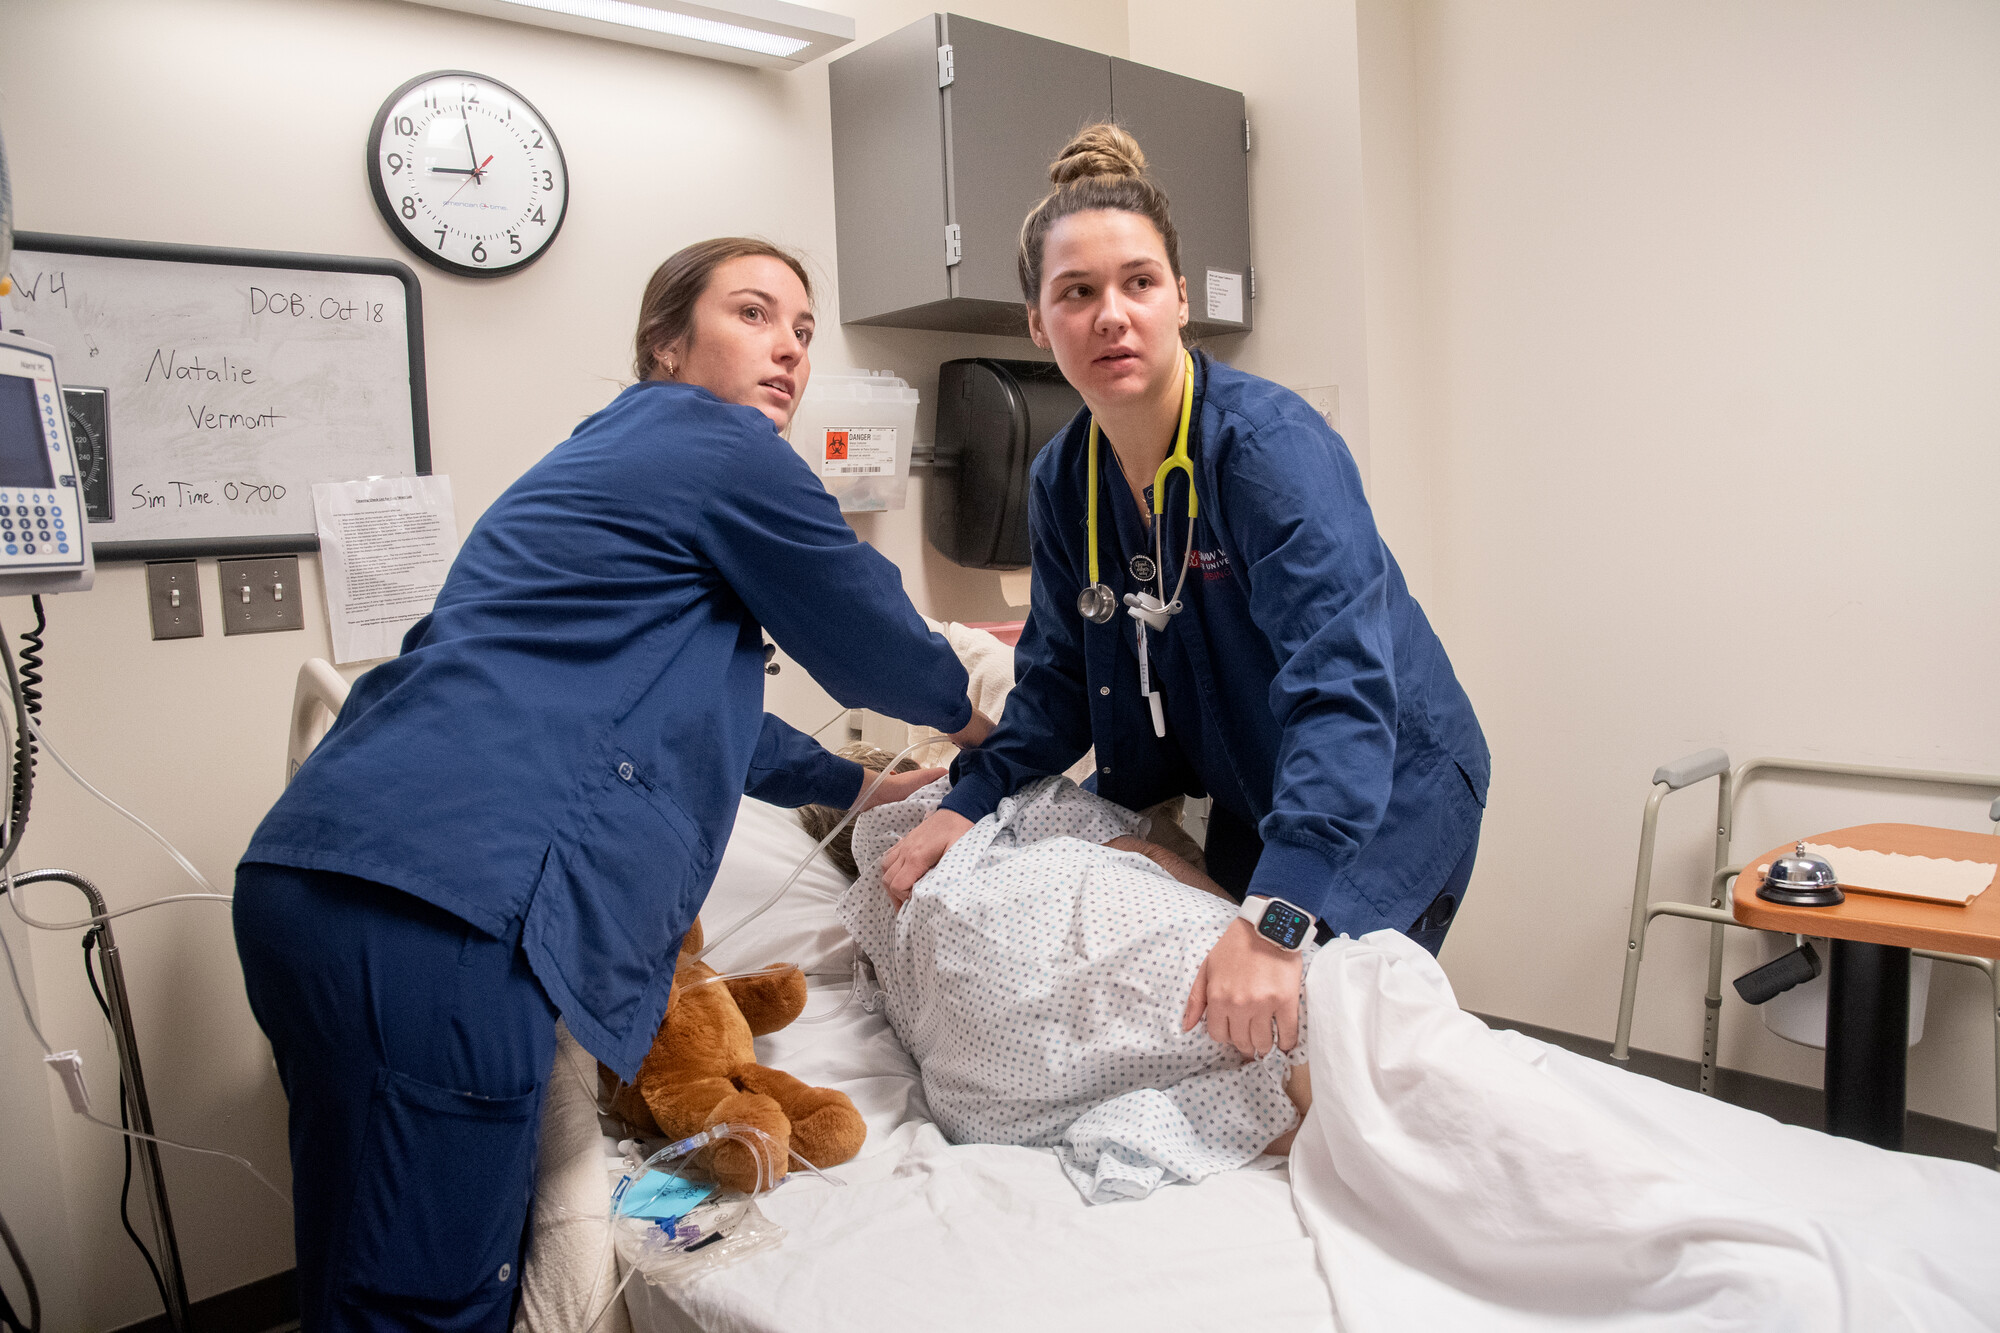 Two young women in blue scrubs work with patient in hospital bed